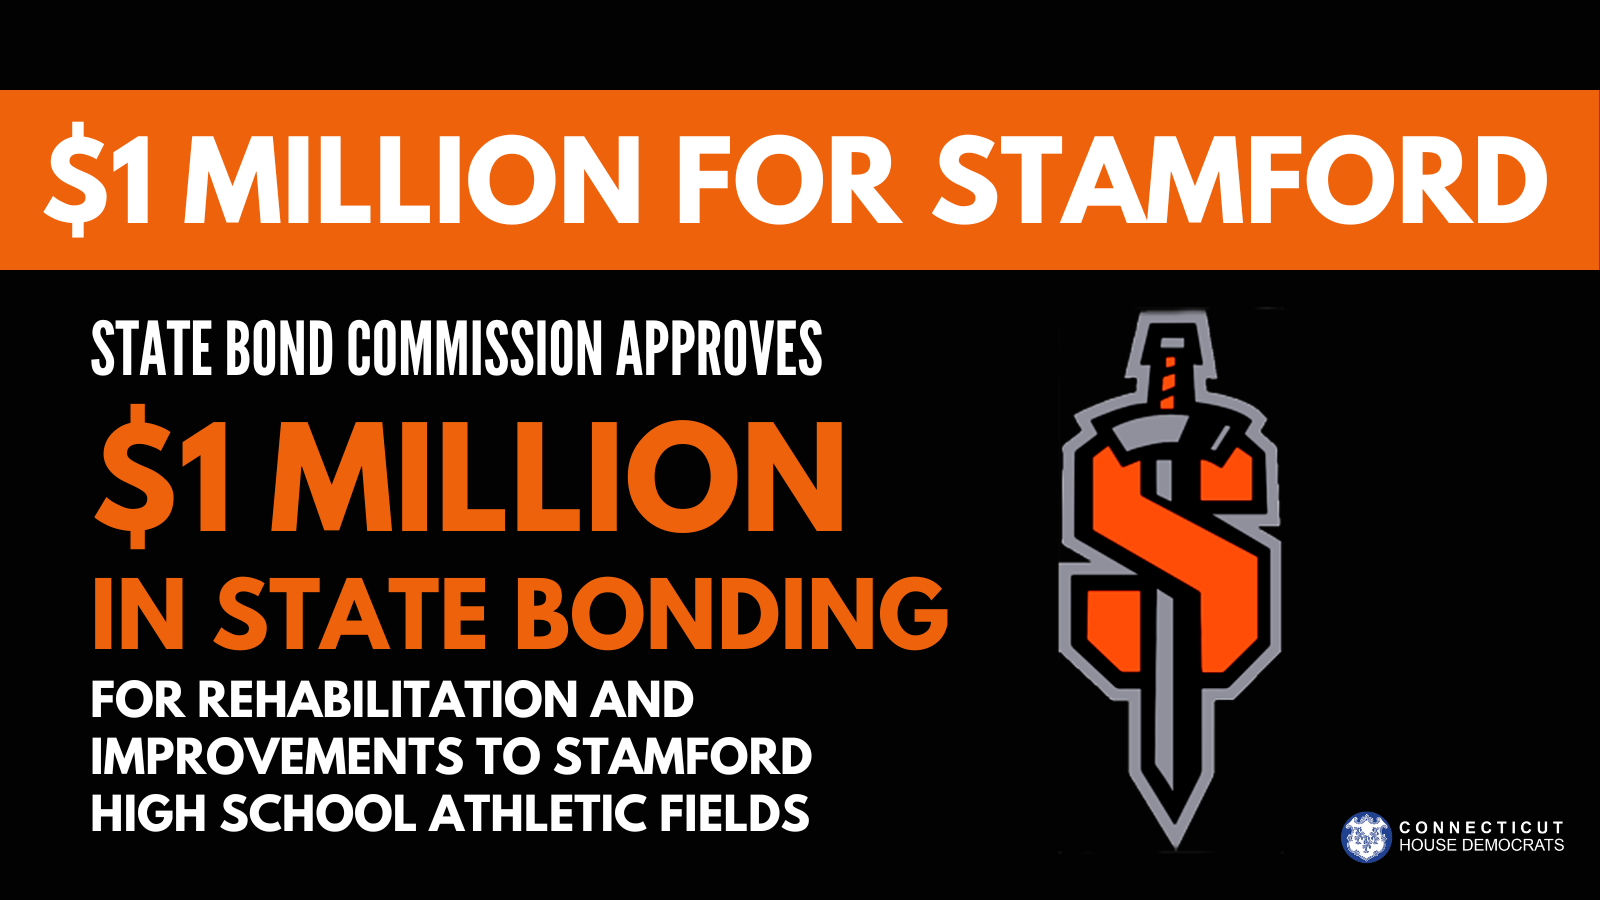 A graphic with a black background that says, "$1 million for Stamford" in white lettering against an orange band across the top of the graphic. Underneath on the left side of the graphic is text that reads, "State Bond Commission approves $1 million in state bonding for rehabilitation and improvements to Stamford High School athletic fields." Stamford High Schools' logo depicting an orange "S" with a sword running through the center is on the right side of the graphic.